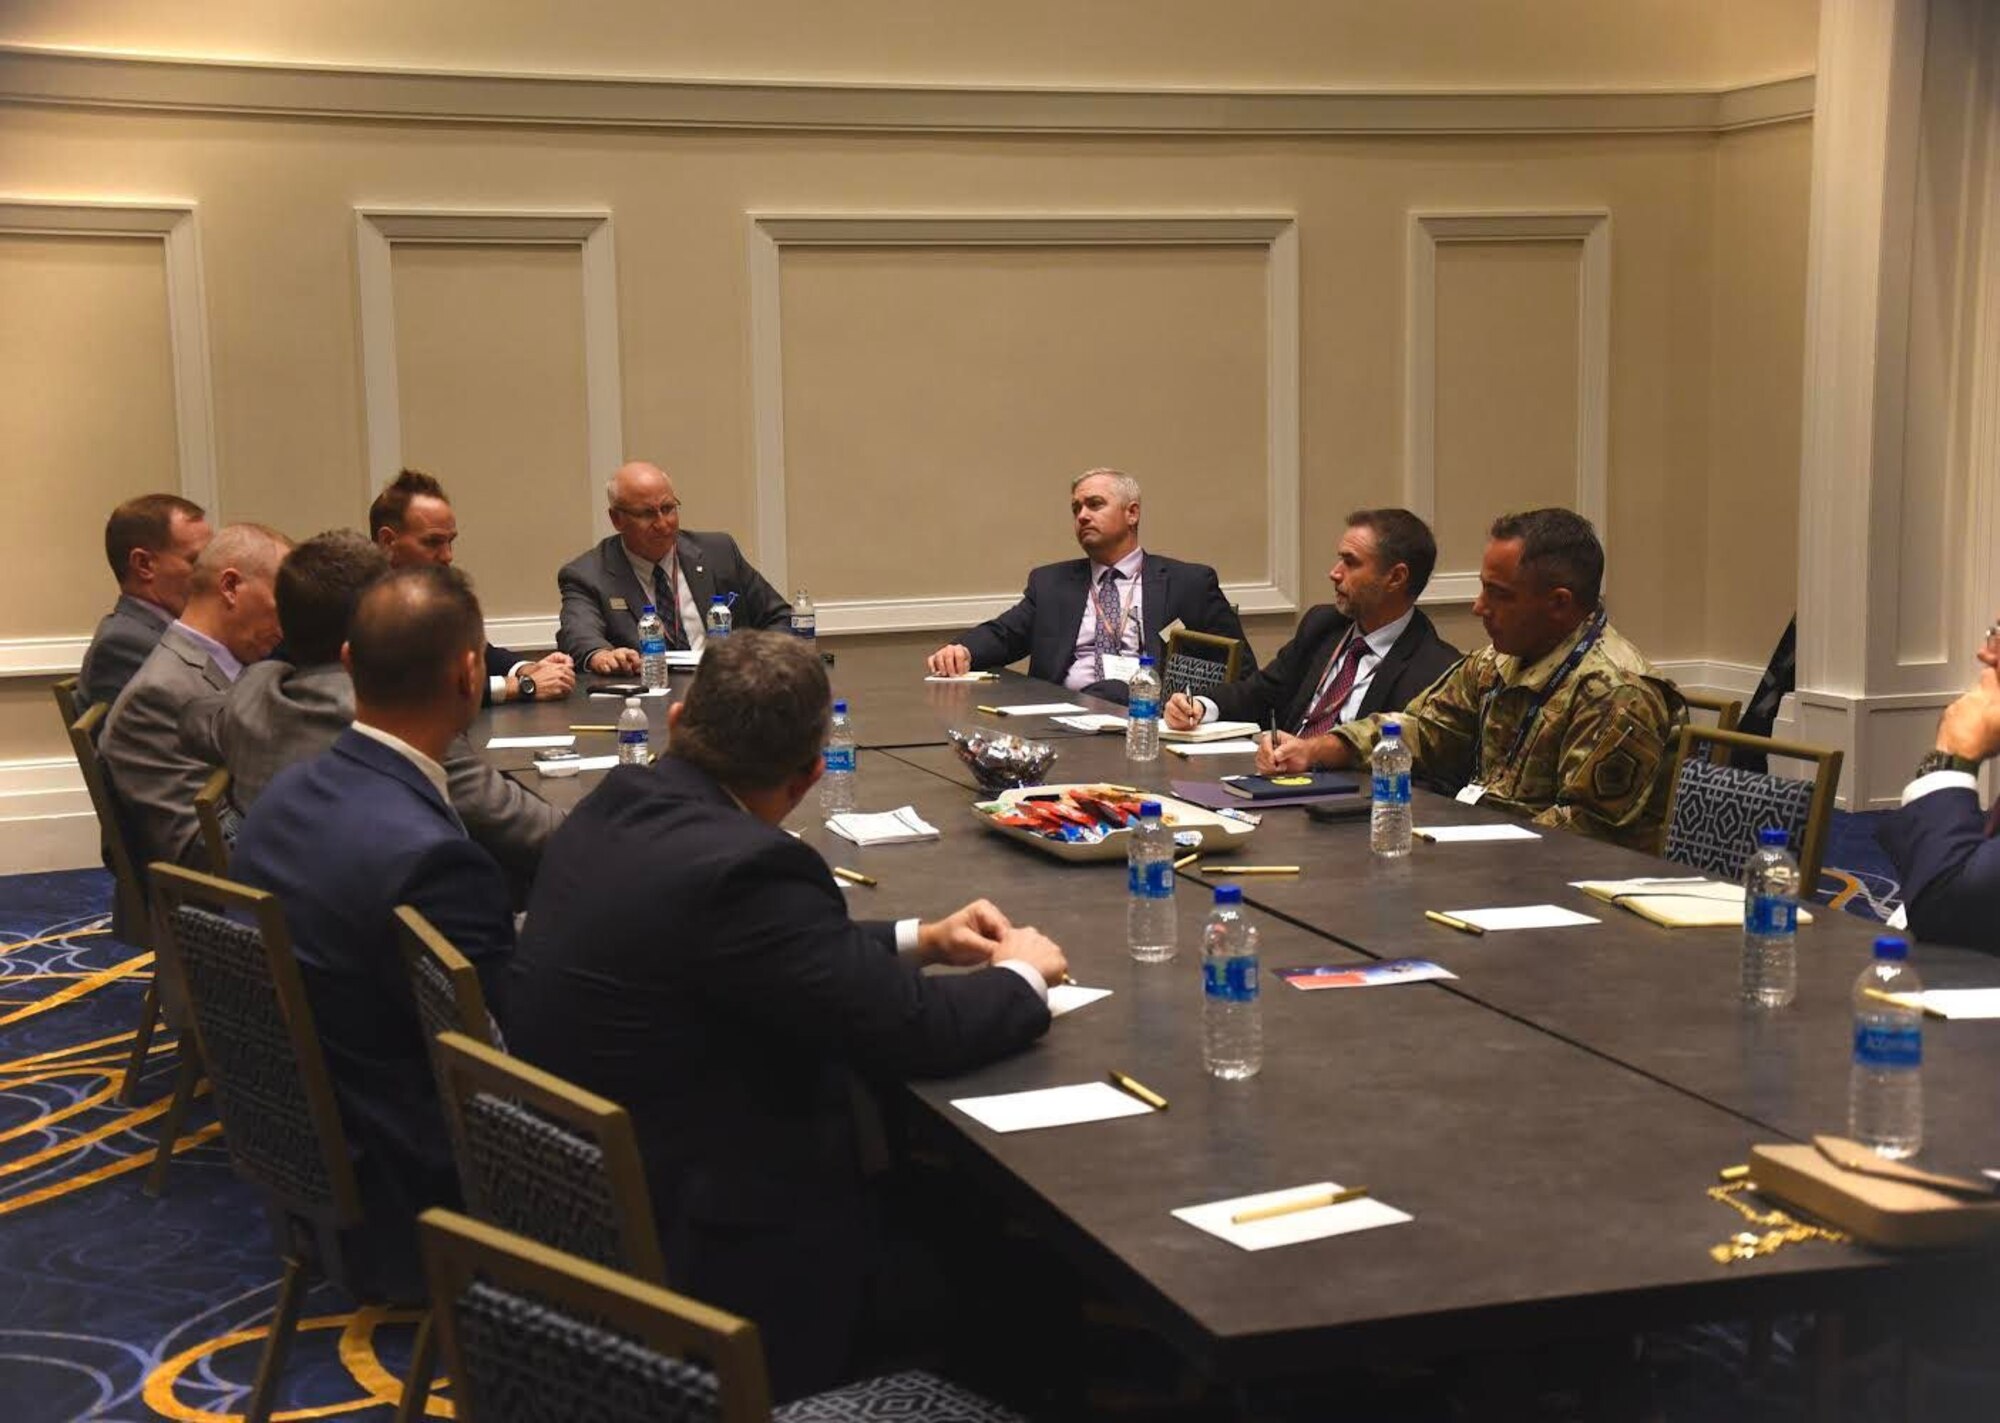 U.S. Air Force Col. Josh Koslov, 350th Spectrum Warfare commander, meets with representatives from BAE Systems to discuss the 350th SWW’s Electromagnetic Spectrum based mission and potential future collaboration between the wing and industry at the Air & Space Forces Association Air, Space & Cyber Conference in Washington D.C., Sept. 19, 2022. The 350th SWW attended the conference to not only moderate an Electromagnetic Warfare (EW) panel, but to meet with partners across the DoD and industry to cultivate potential relationships to further the development of lethal EW capabilities to support the warfighter. (U.S. Air Force photo by 1st Lt Benjamin Aronson)